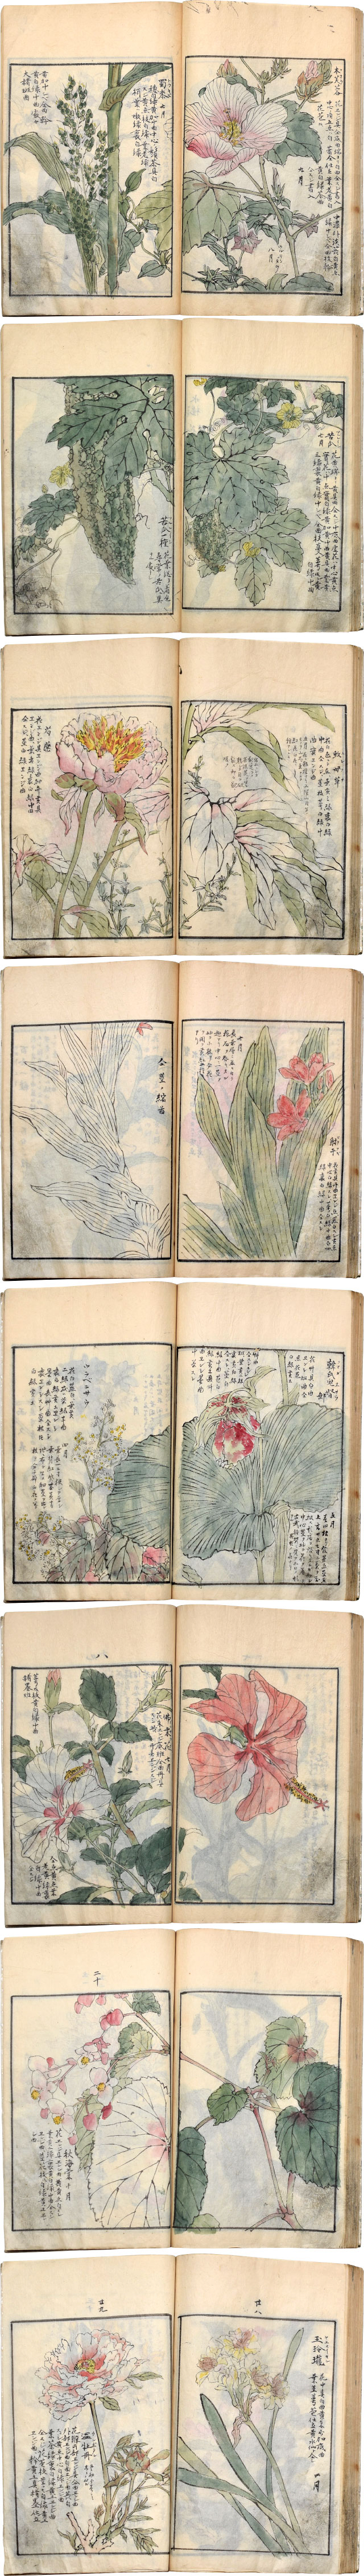 attributed to Kono Bairei One Thousand Kinds of Flowers